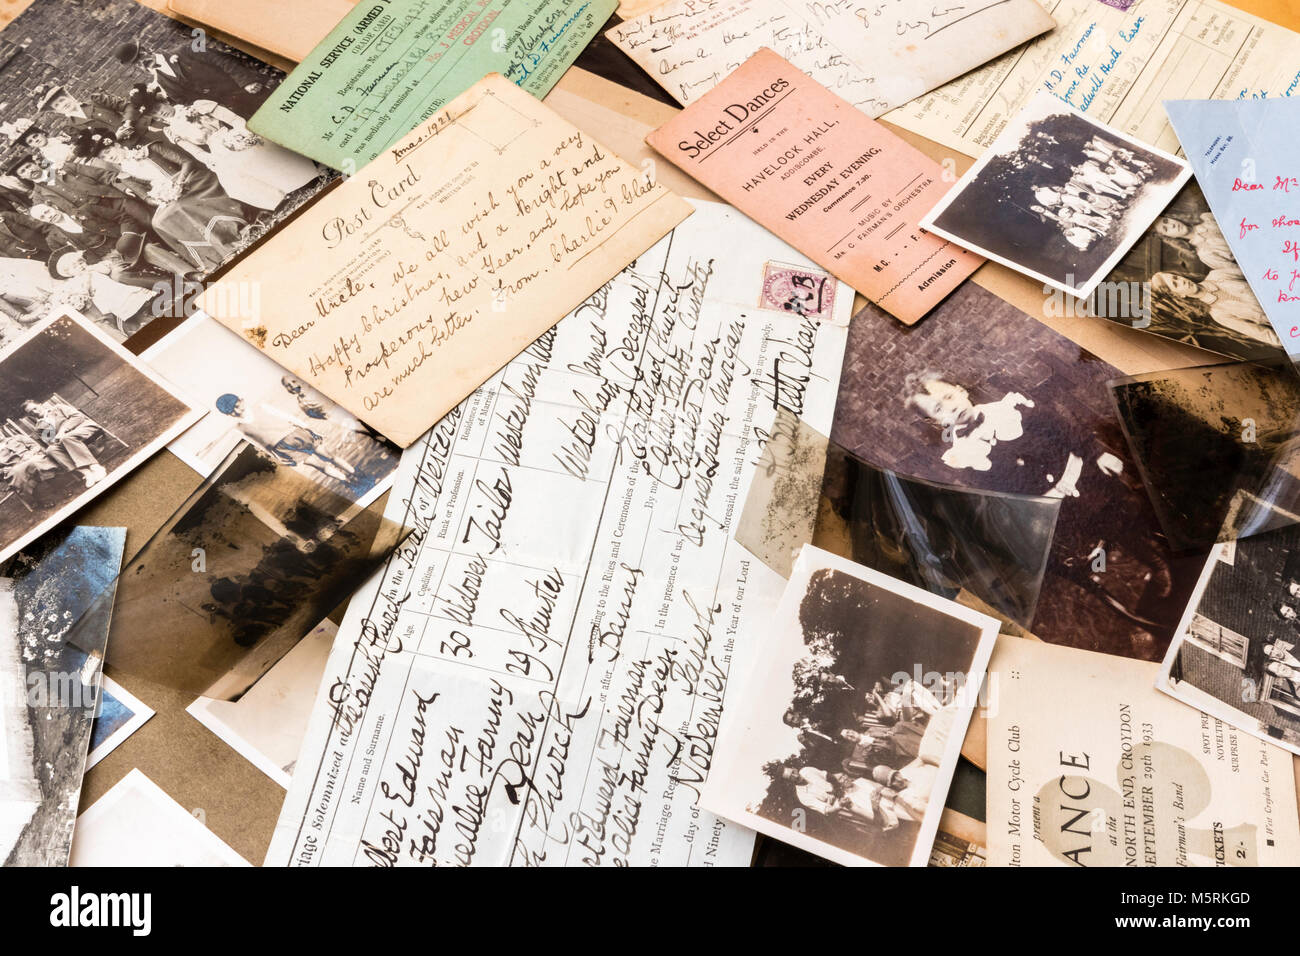 Genealogy and memorabilia. 1900-1920 Photographs, negatives, postcards, birth certificate, dance tickets, letters scattered. Family history items. Stock Photo